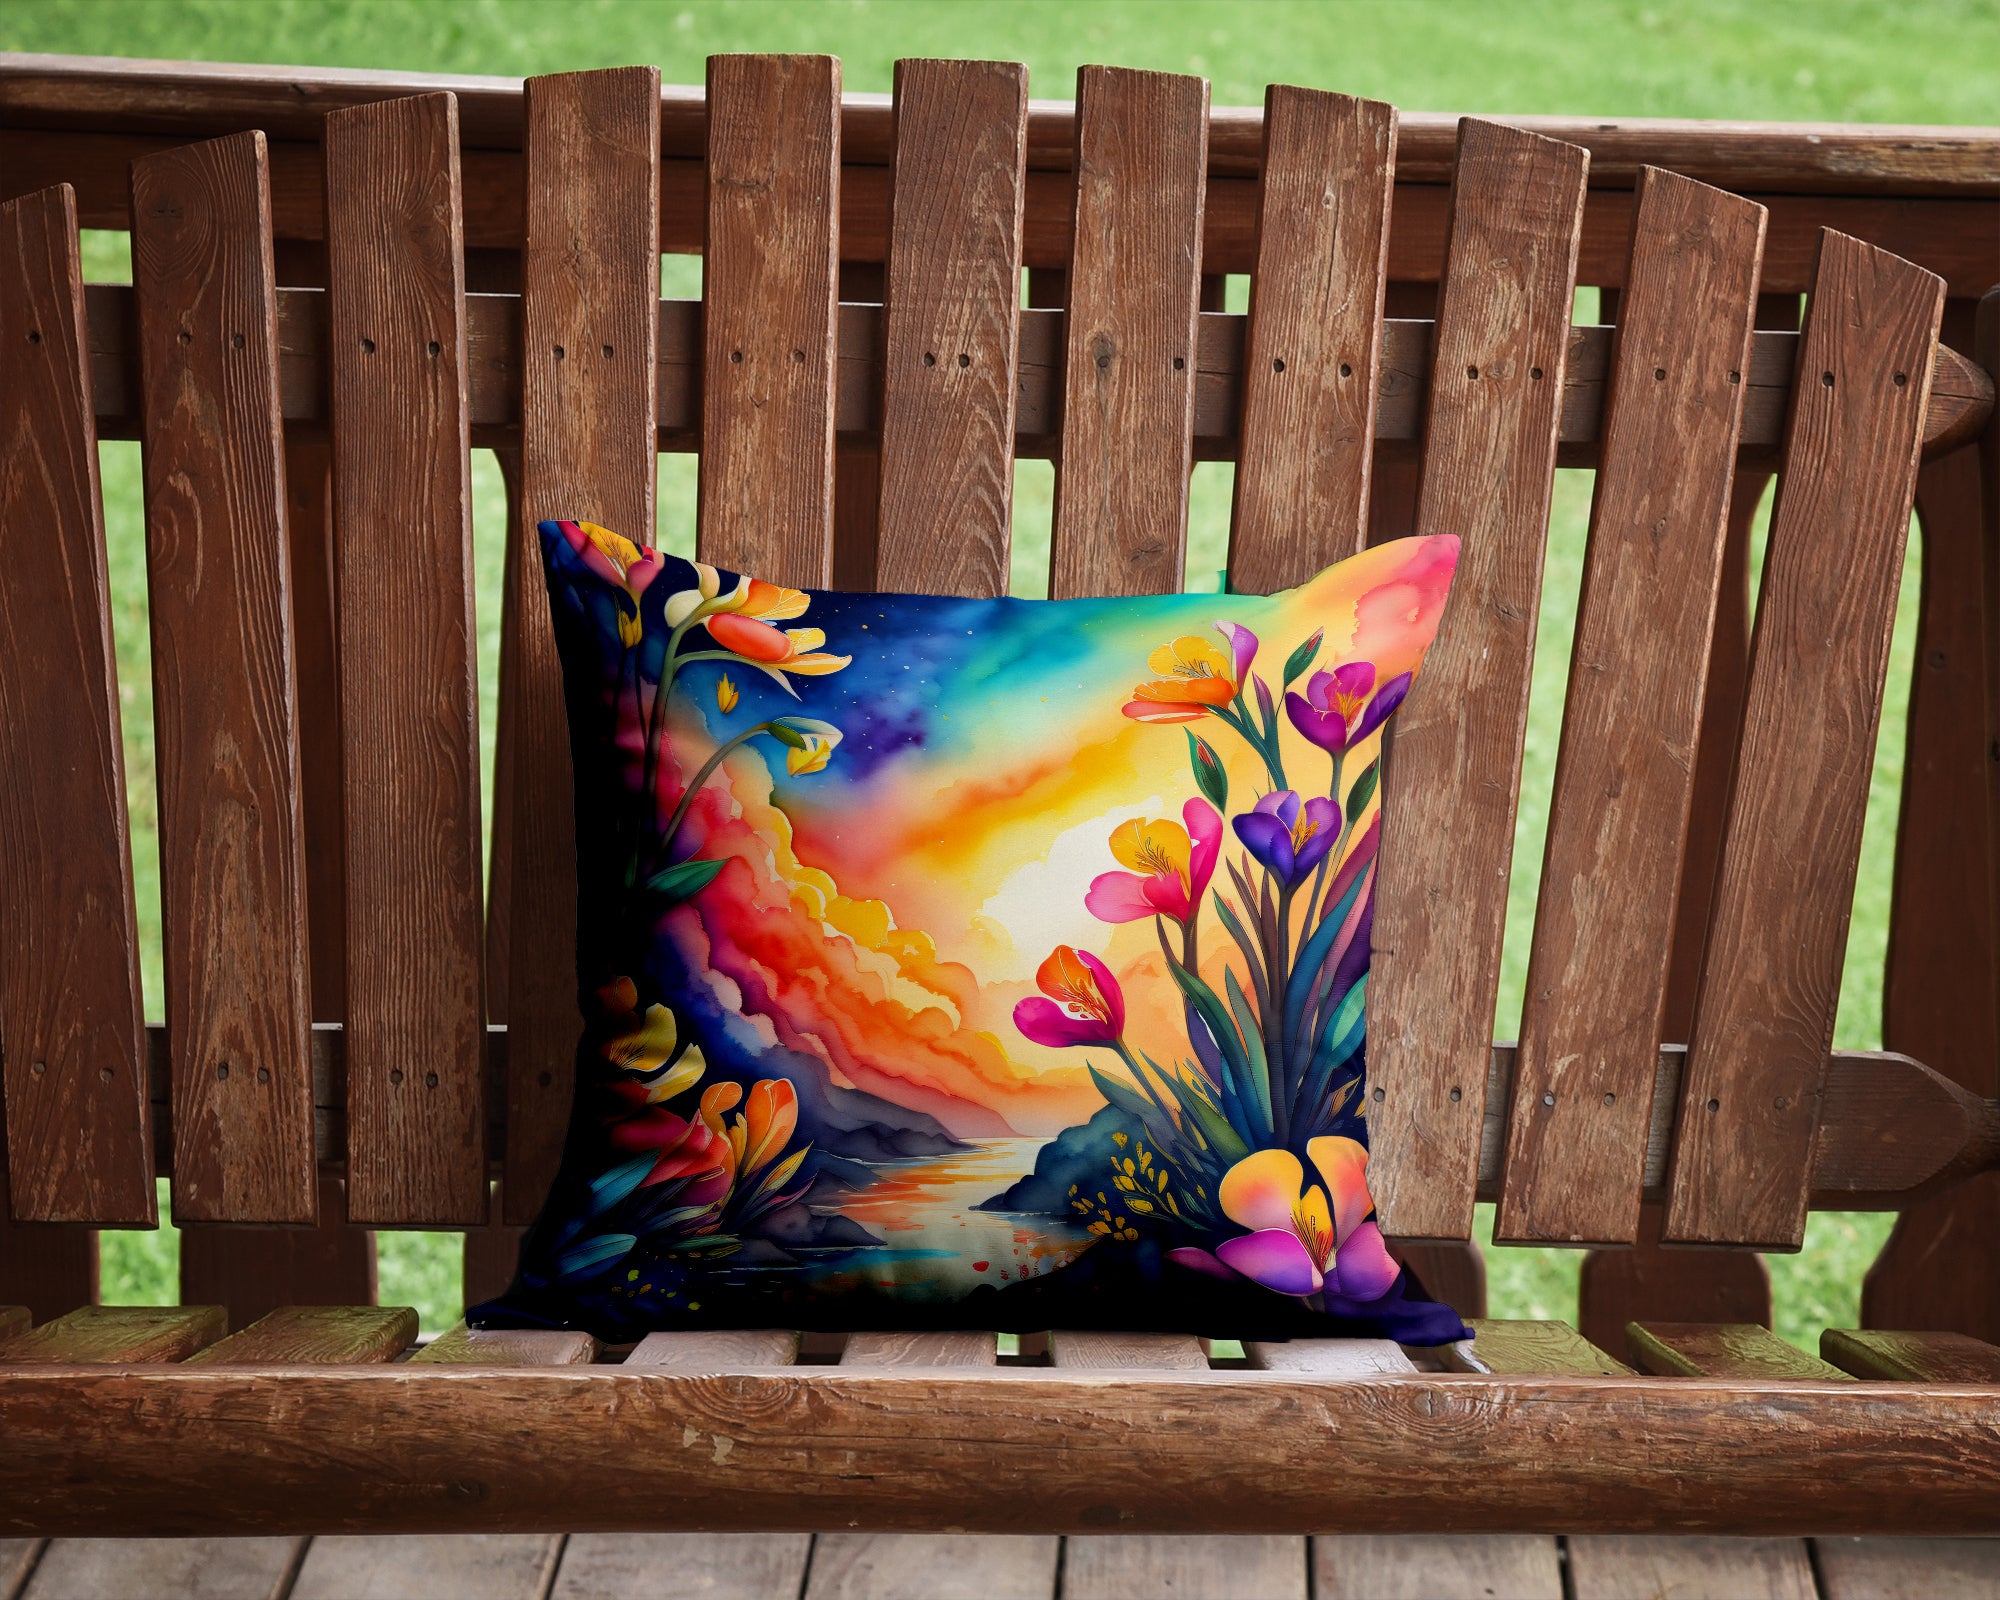 Buy this Colorful Freesia Fabric Decorative Pillow